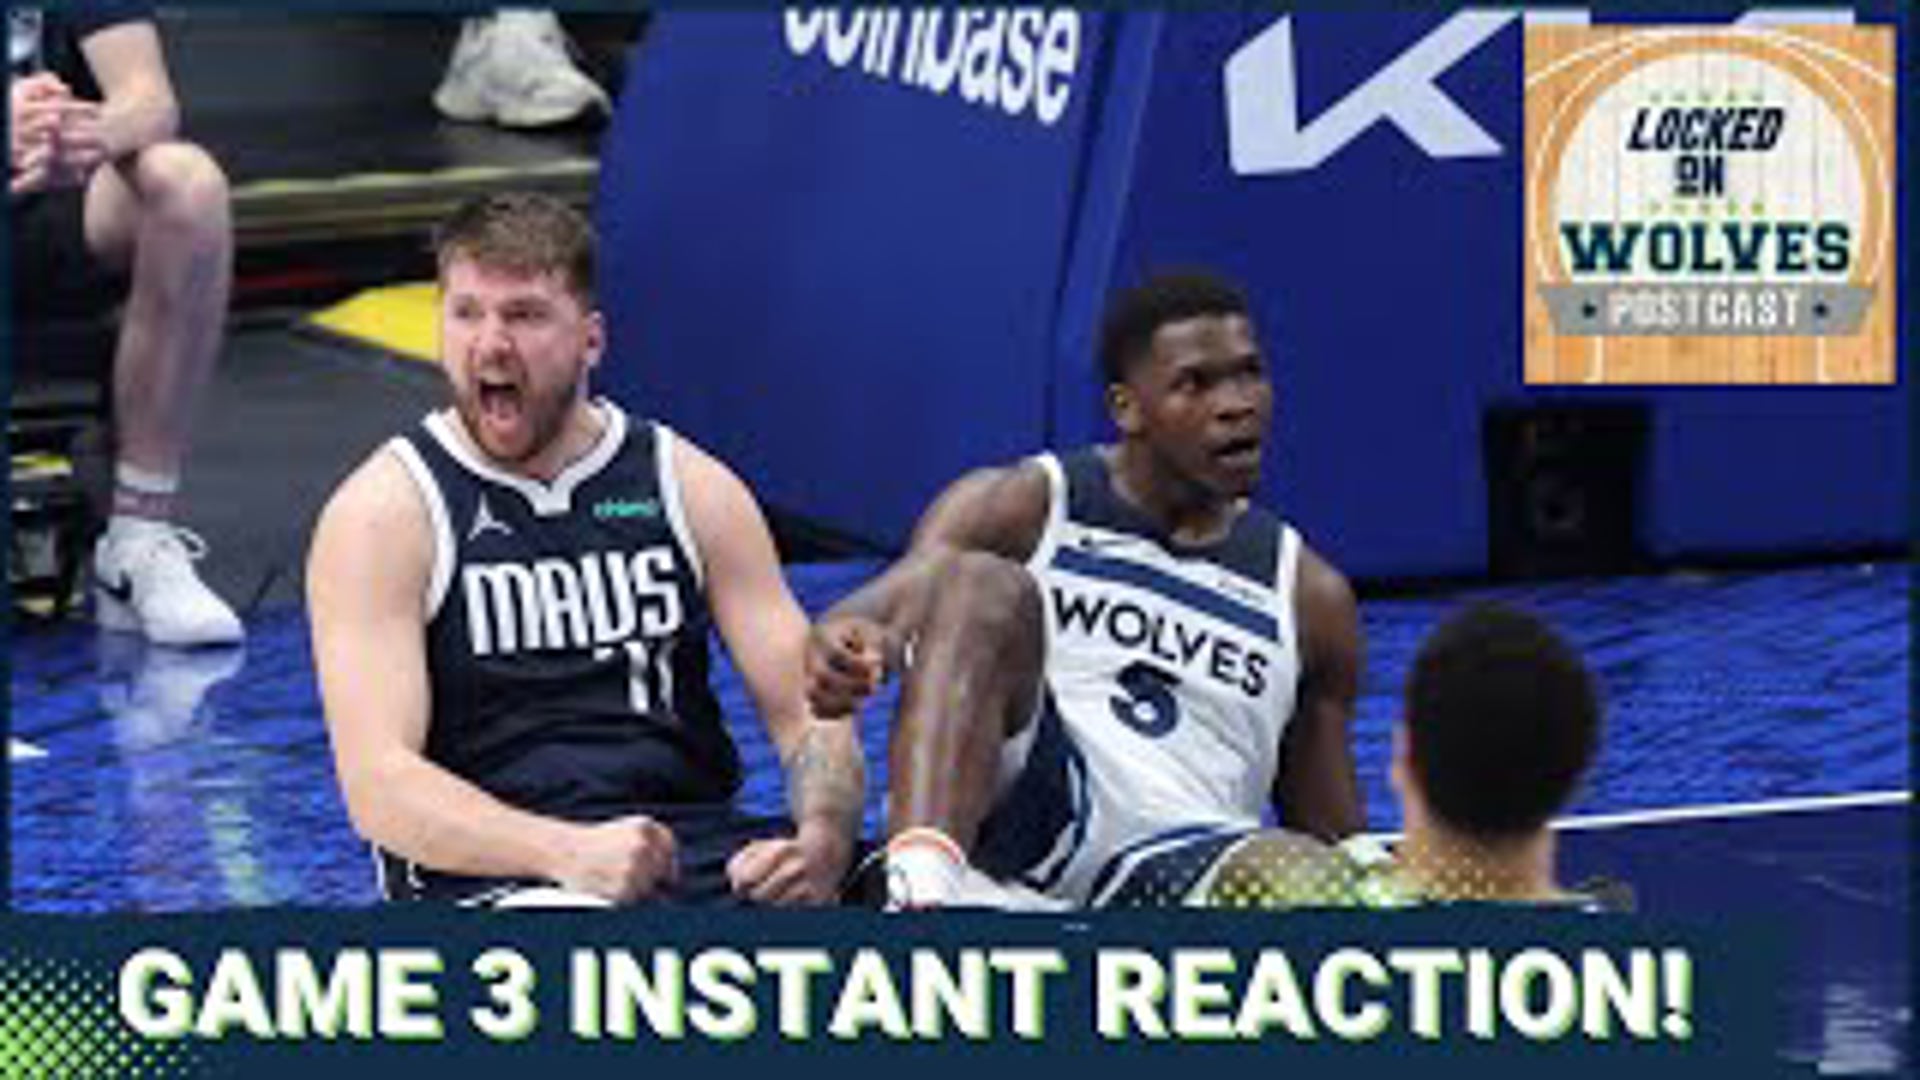 The Minnesota Timberwolves went ice cold and unraveled in the final minutes in Dallas versus the Mavericks in game three.